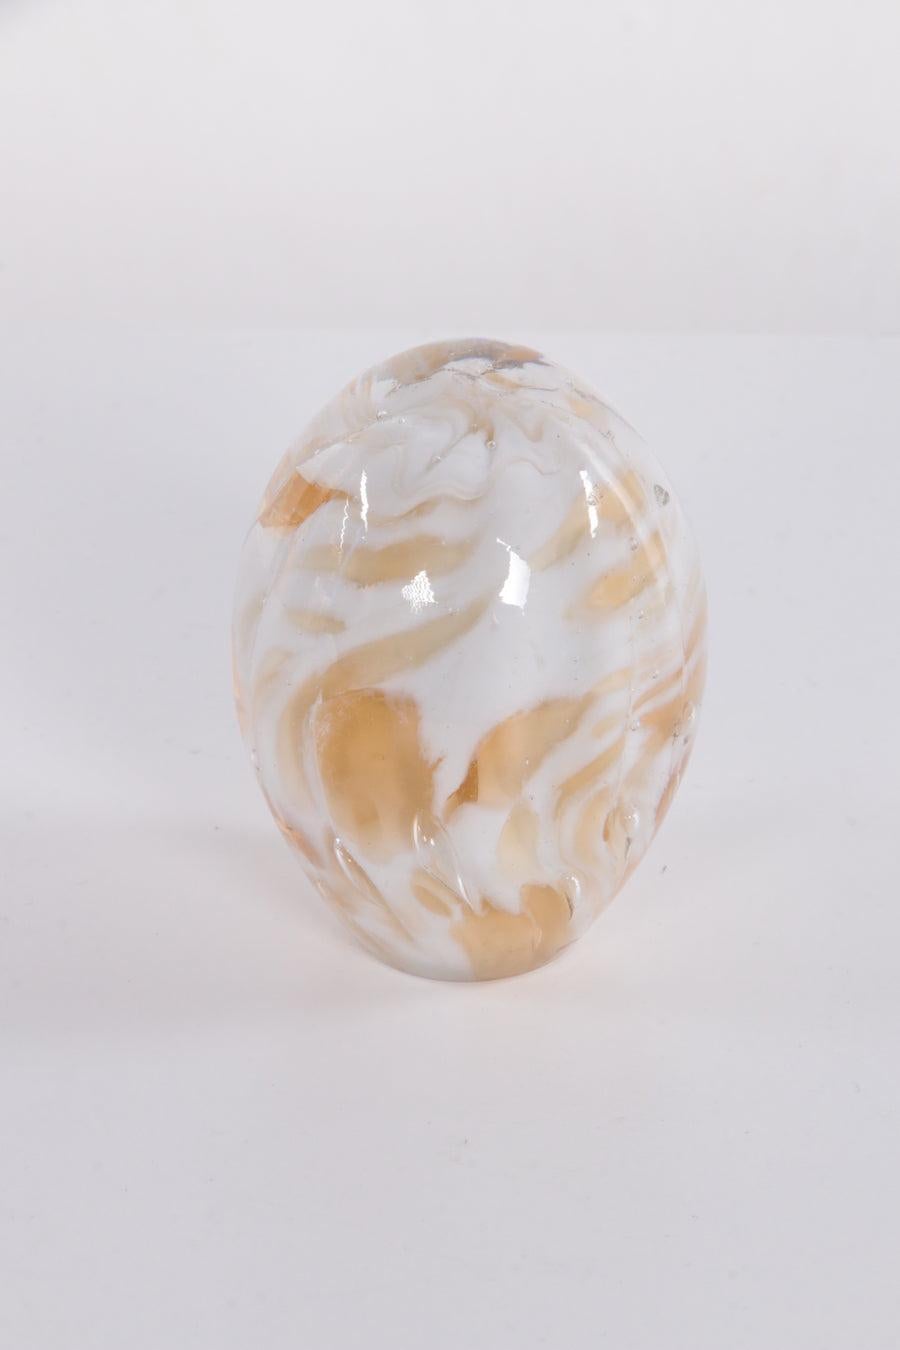 Paperweight Egg Shape and Nicely Colored with Light Orange

Additional information: 
Dimensions: 6 W x 6 D x 8 H cm 
Period of Time: 1960
Condition: Good
